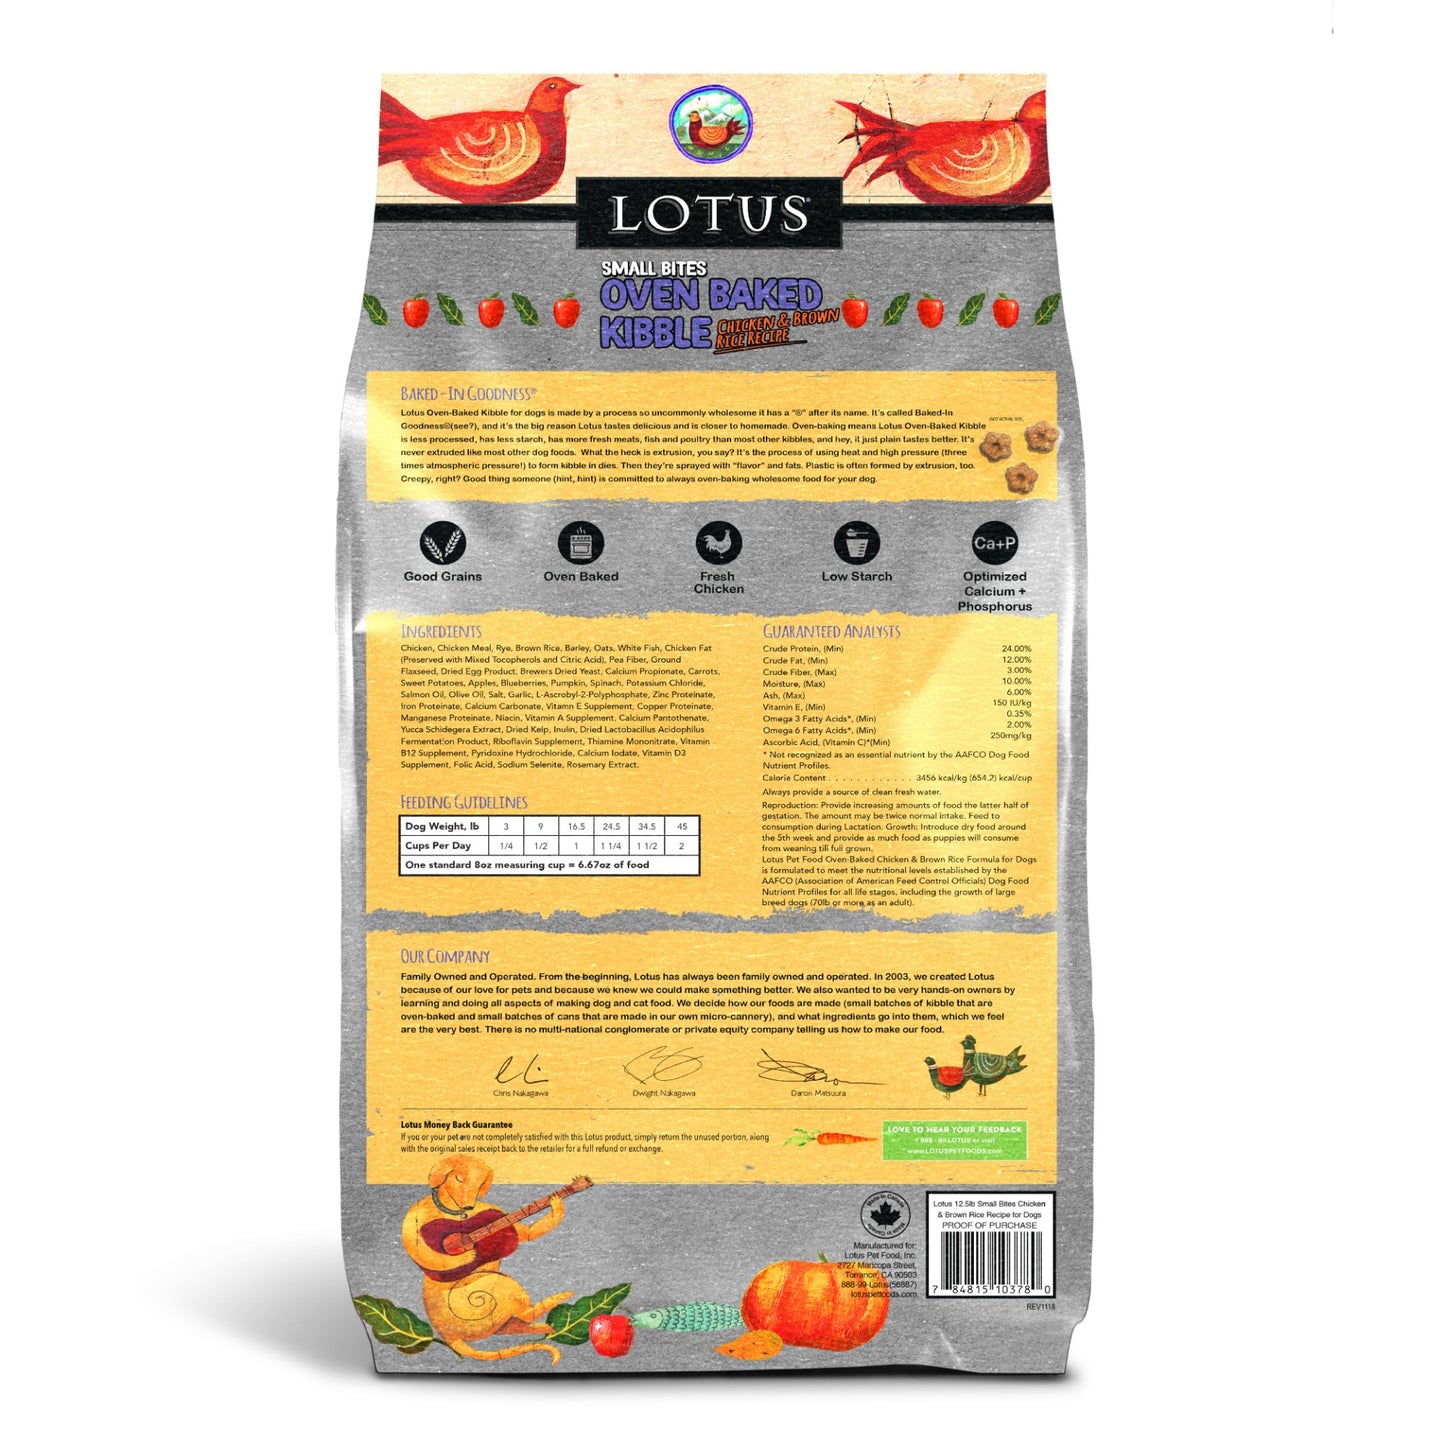 Lotus Small Bites Oven Baked Chicken Recipe Dog Kibble